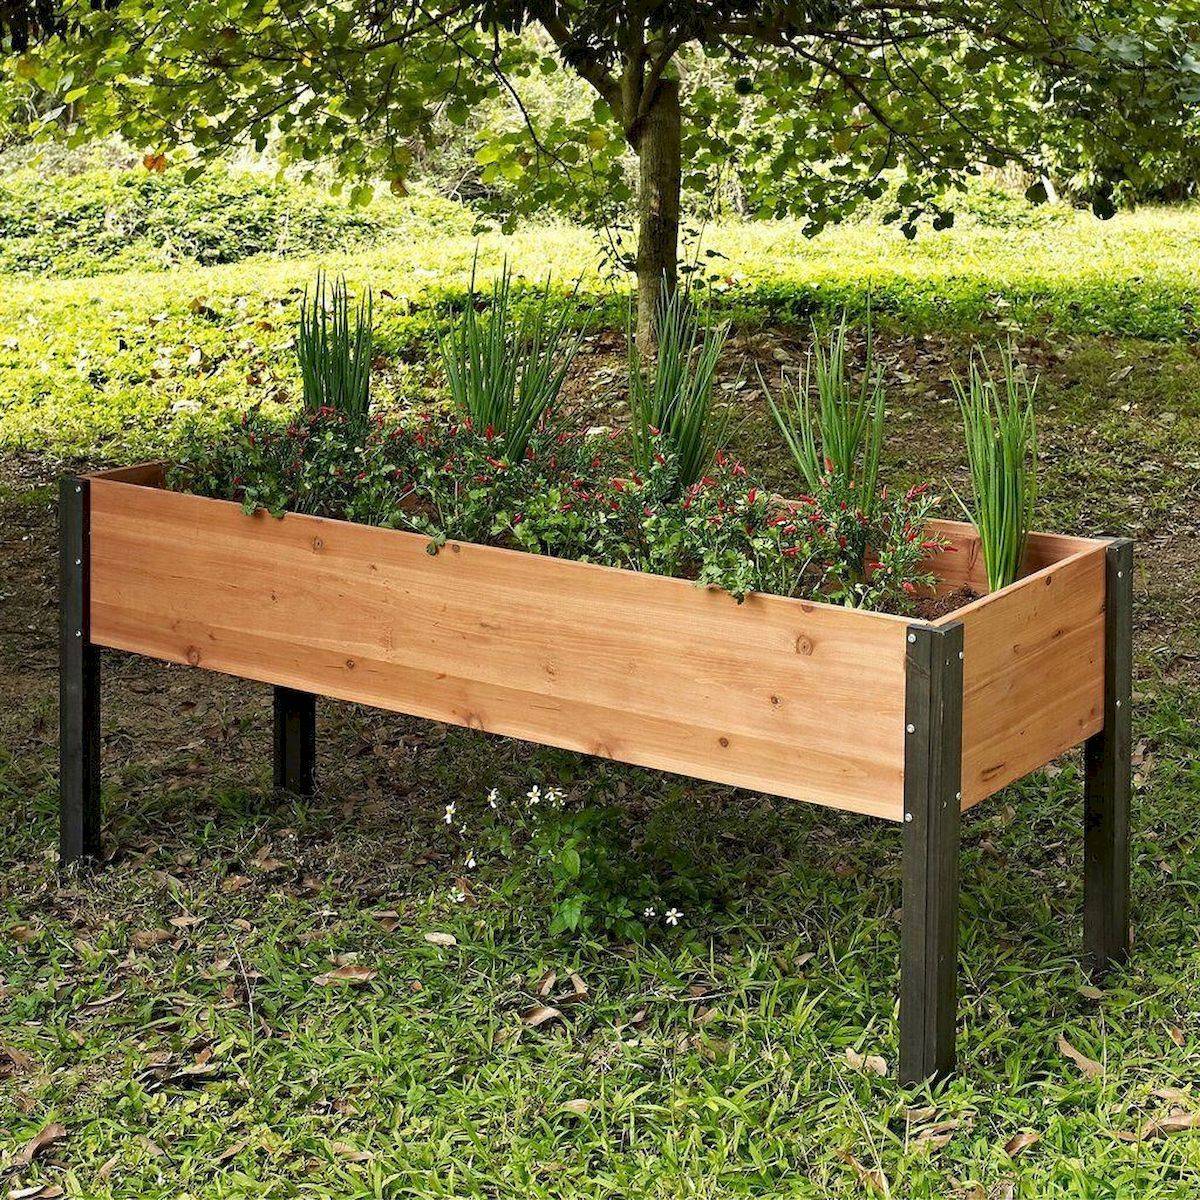 Table Raised Garden Beds